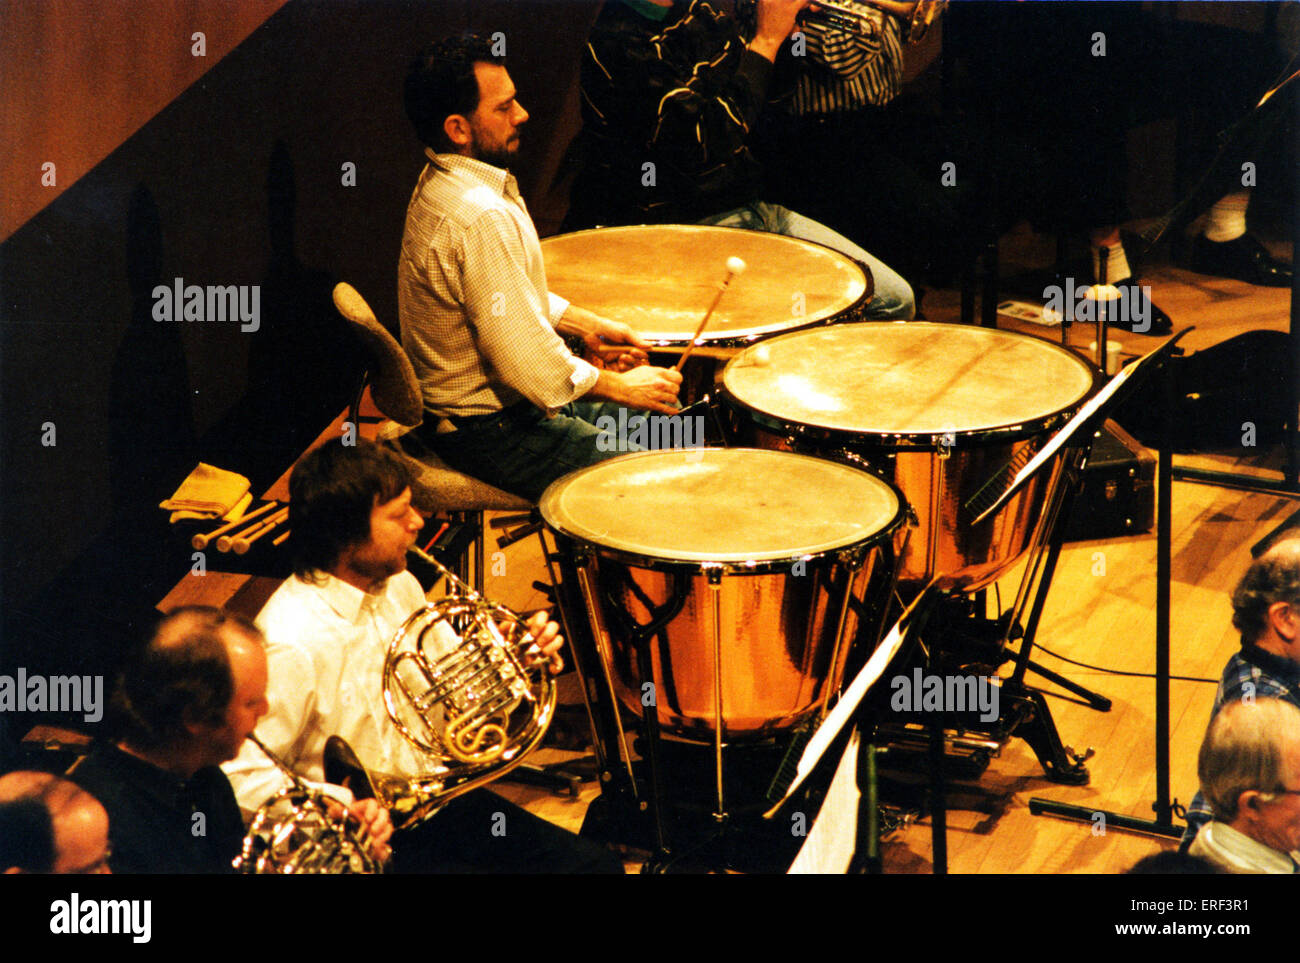 Ringer timpani played by S. Barnard - in percussion section of orchestra. Stock Photo